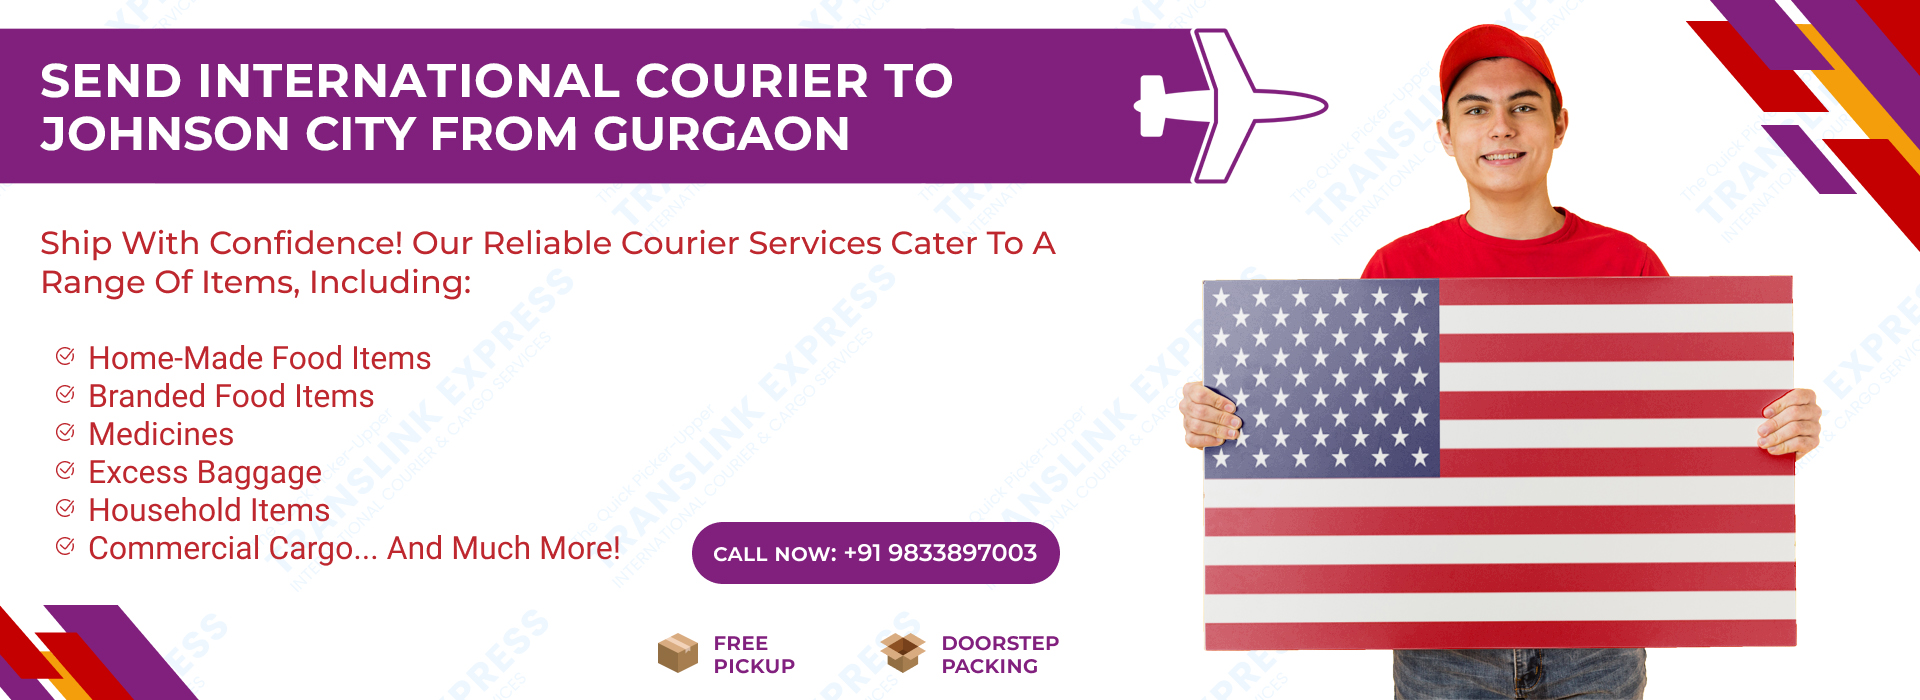 Courier to Johnson City From Gurgaon